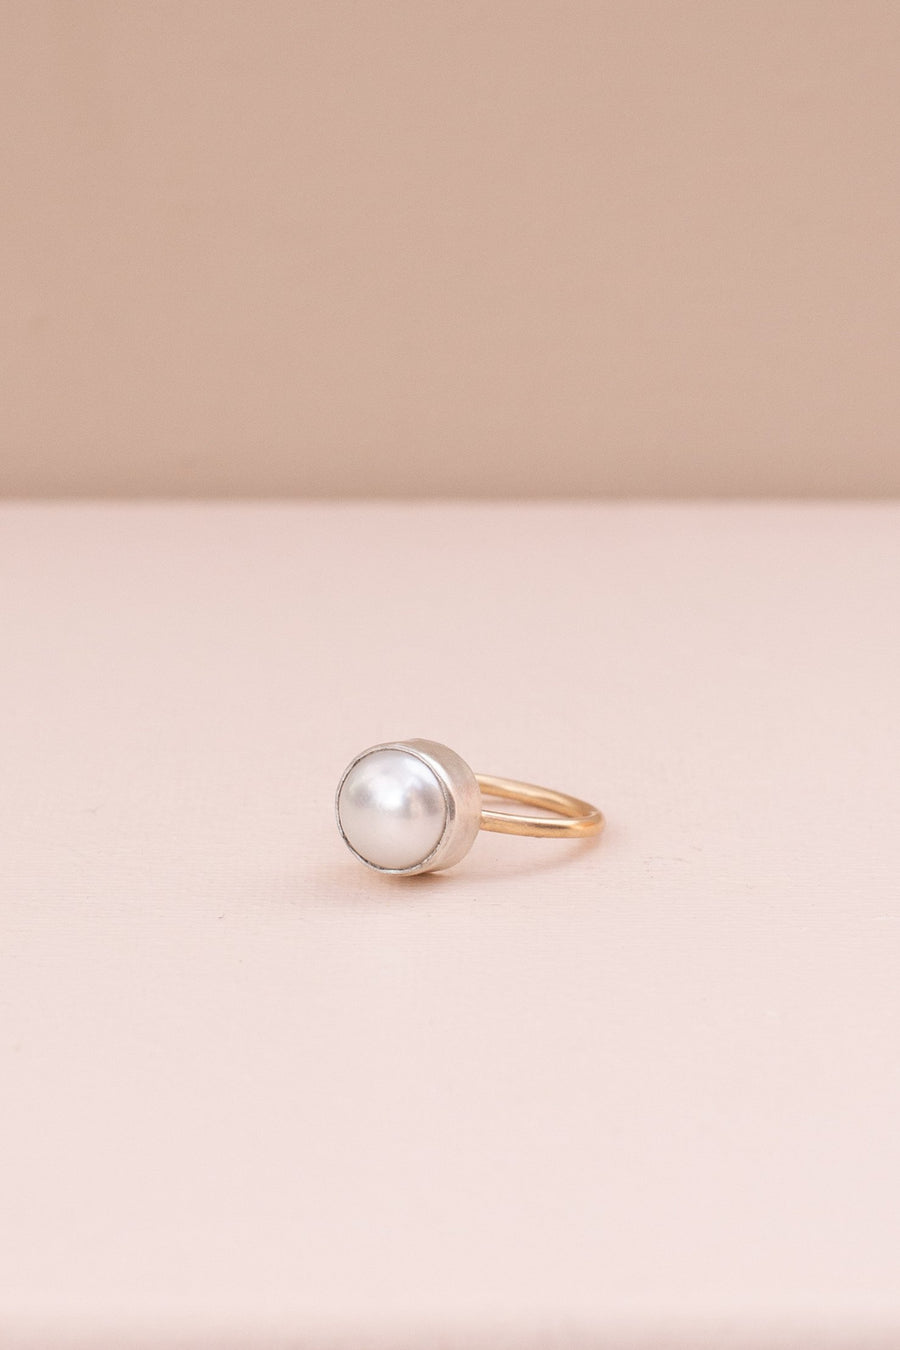 Pearl Statement Ring by Samantha Slater